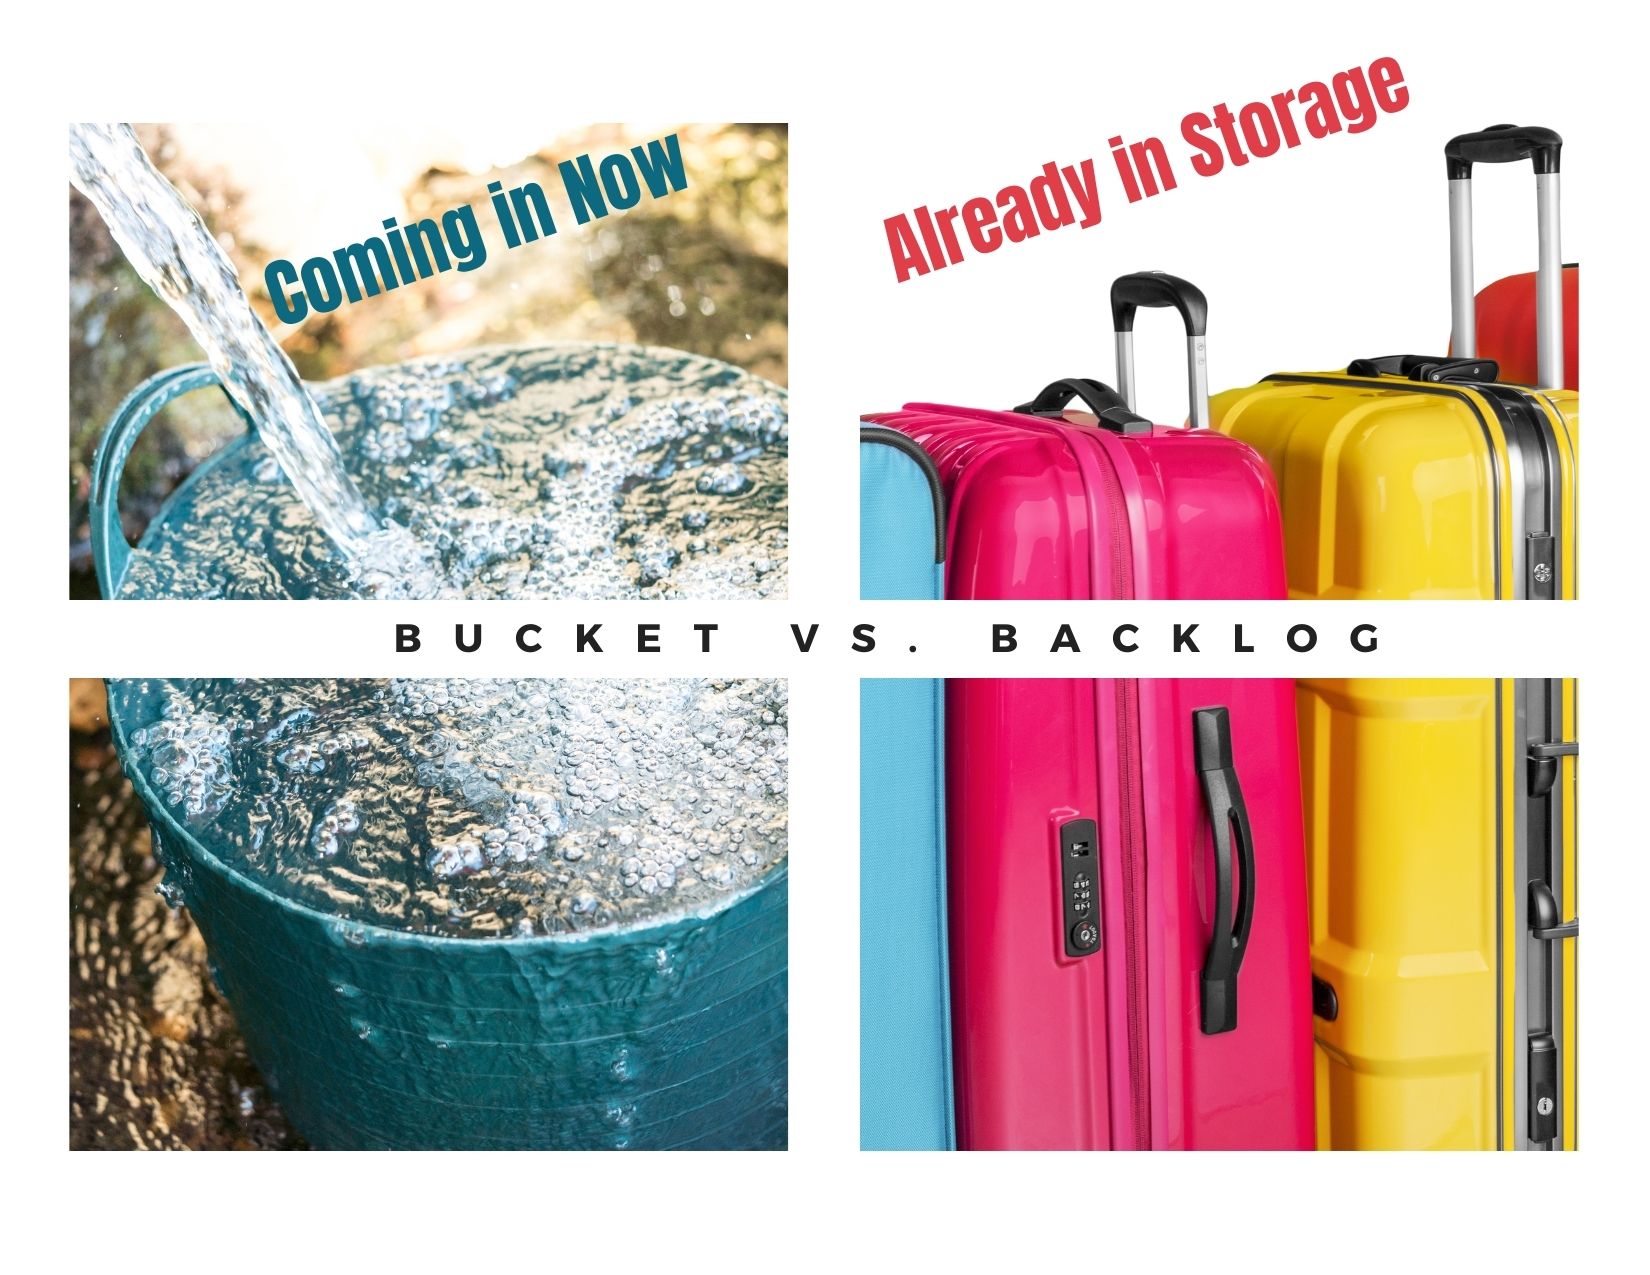 Obstacles with MTHFR – The Bucket and The Backlog